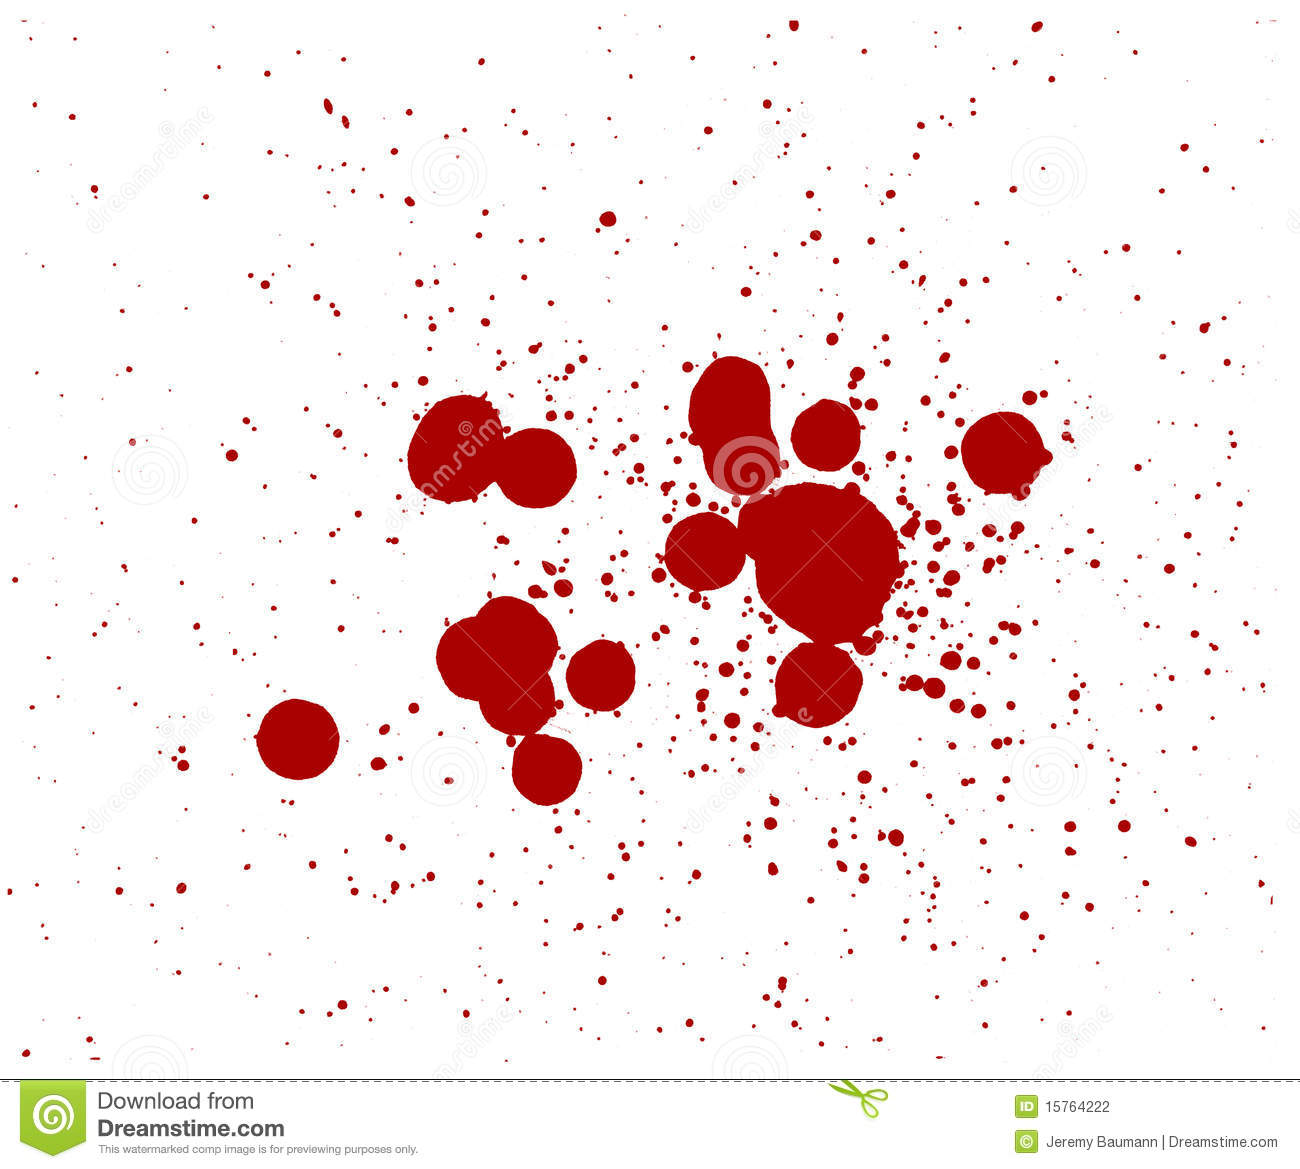 Vector Looking Blood Drops With A White Background 